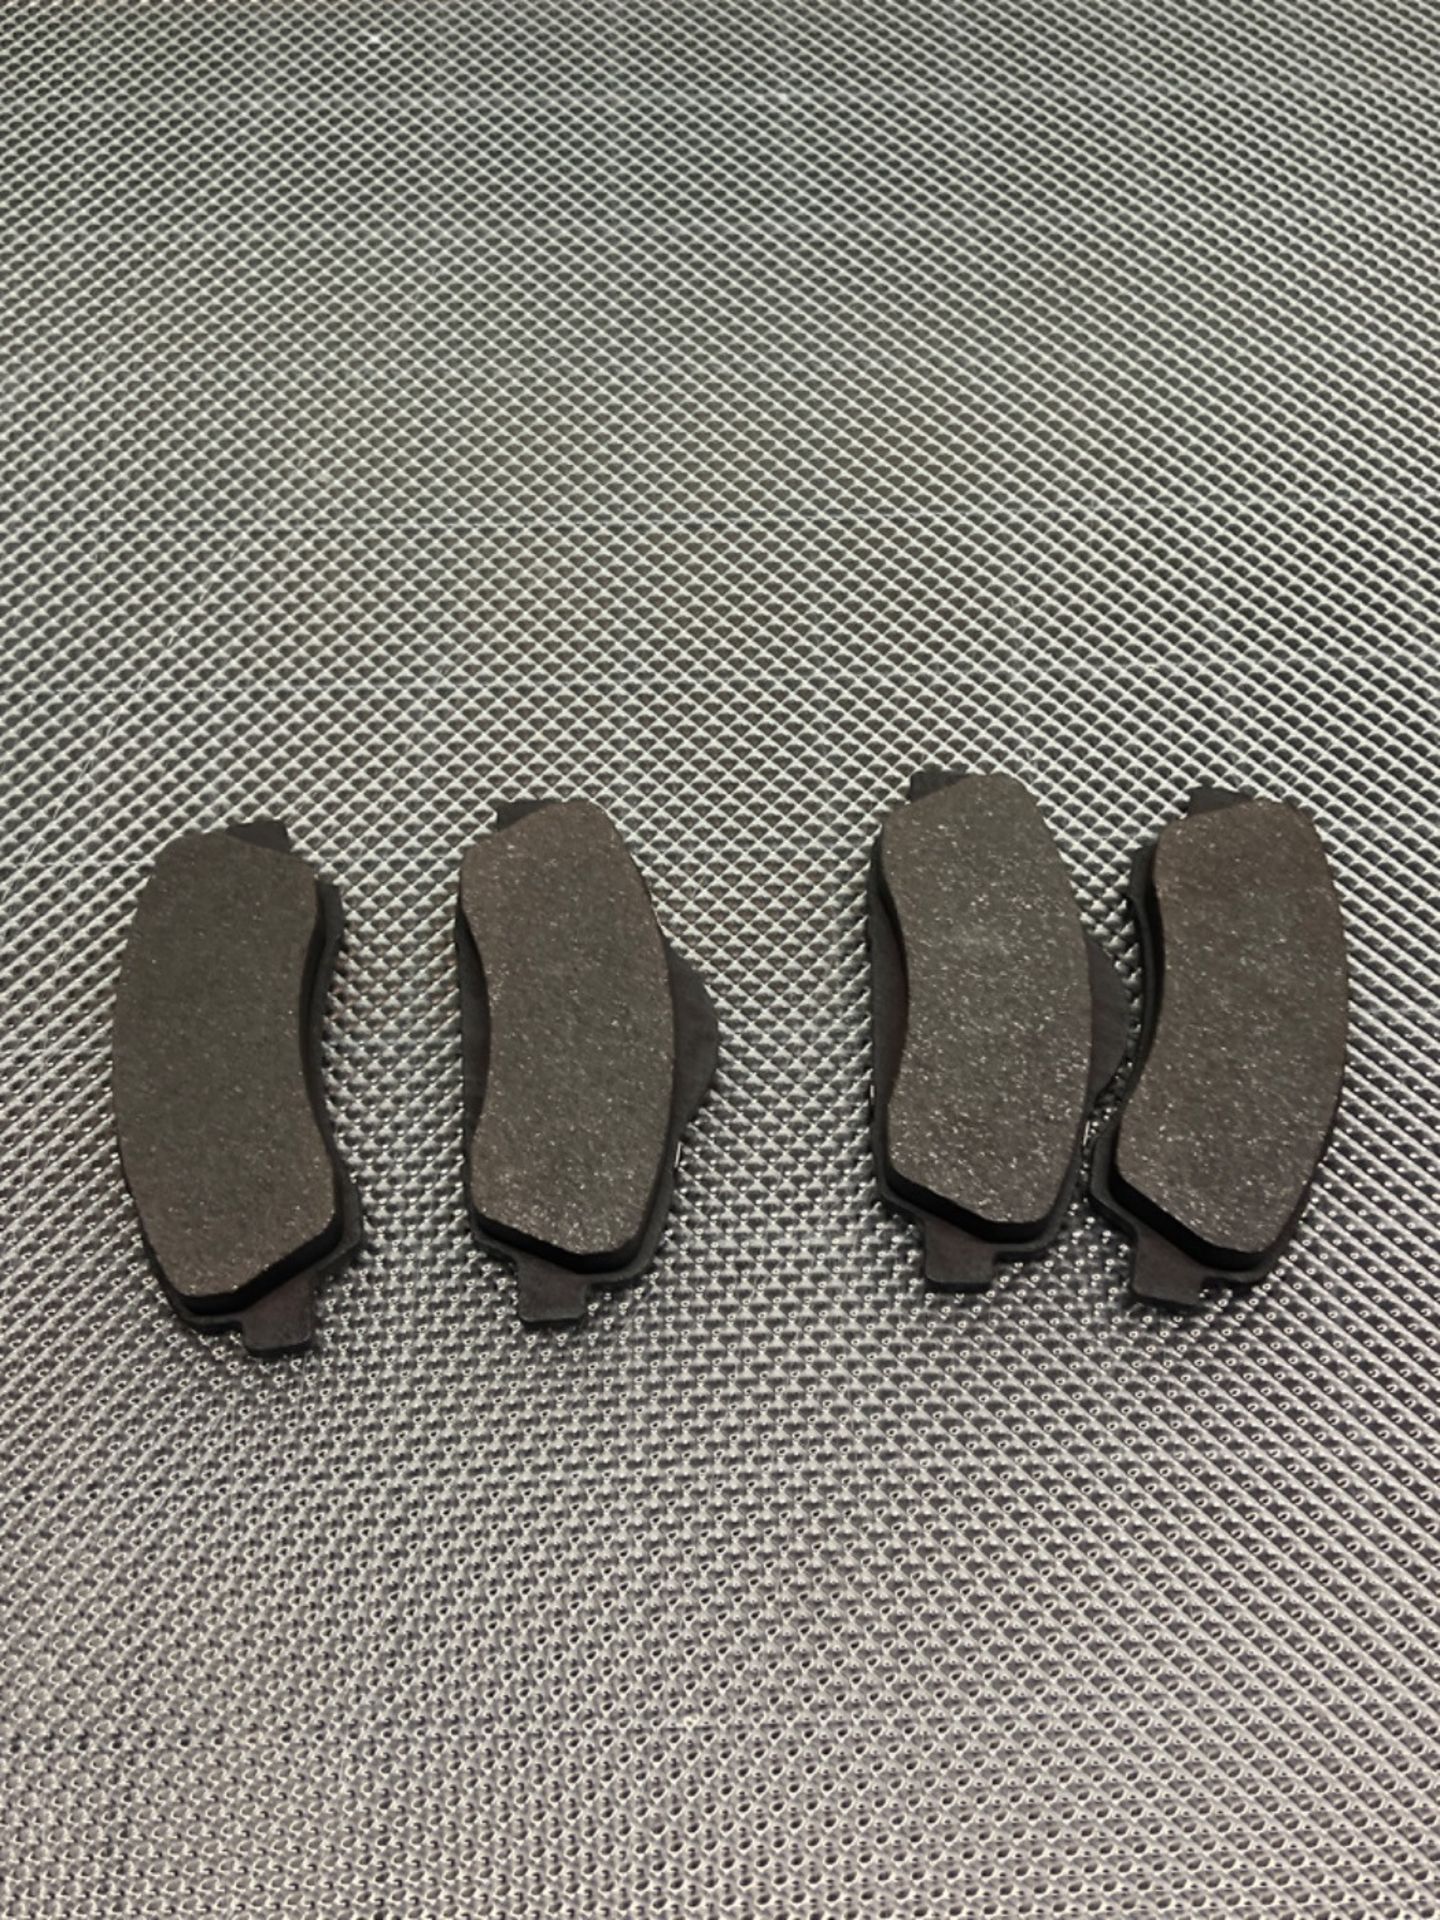 Bosch BP1708 Brake Pads - Front Axle - ECE-R90 Certified - 1 Set of 4 Pads - Image 3 of 3